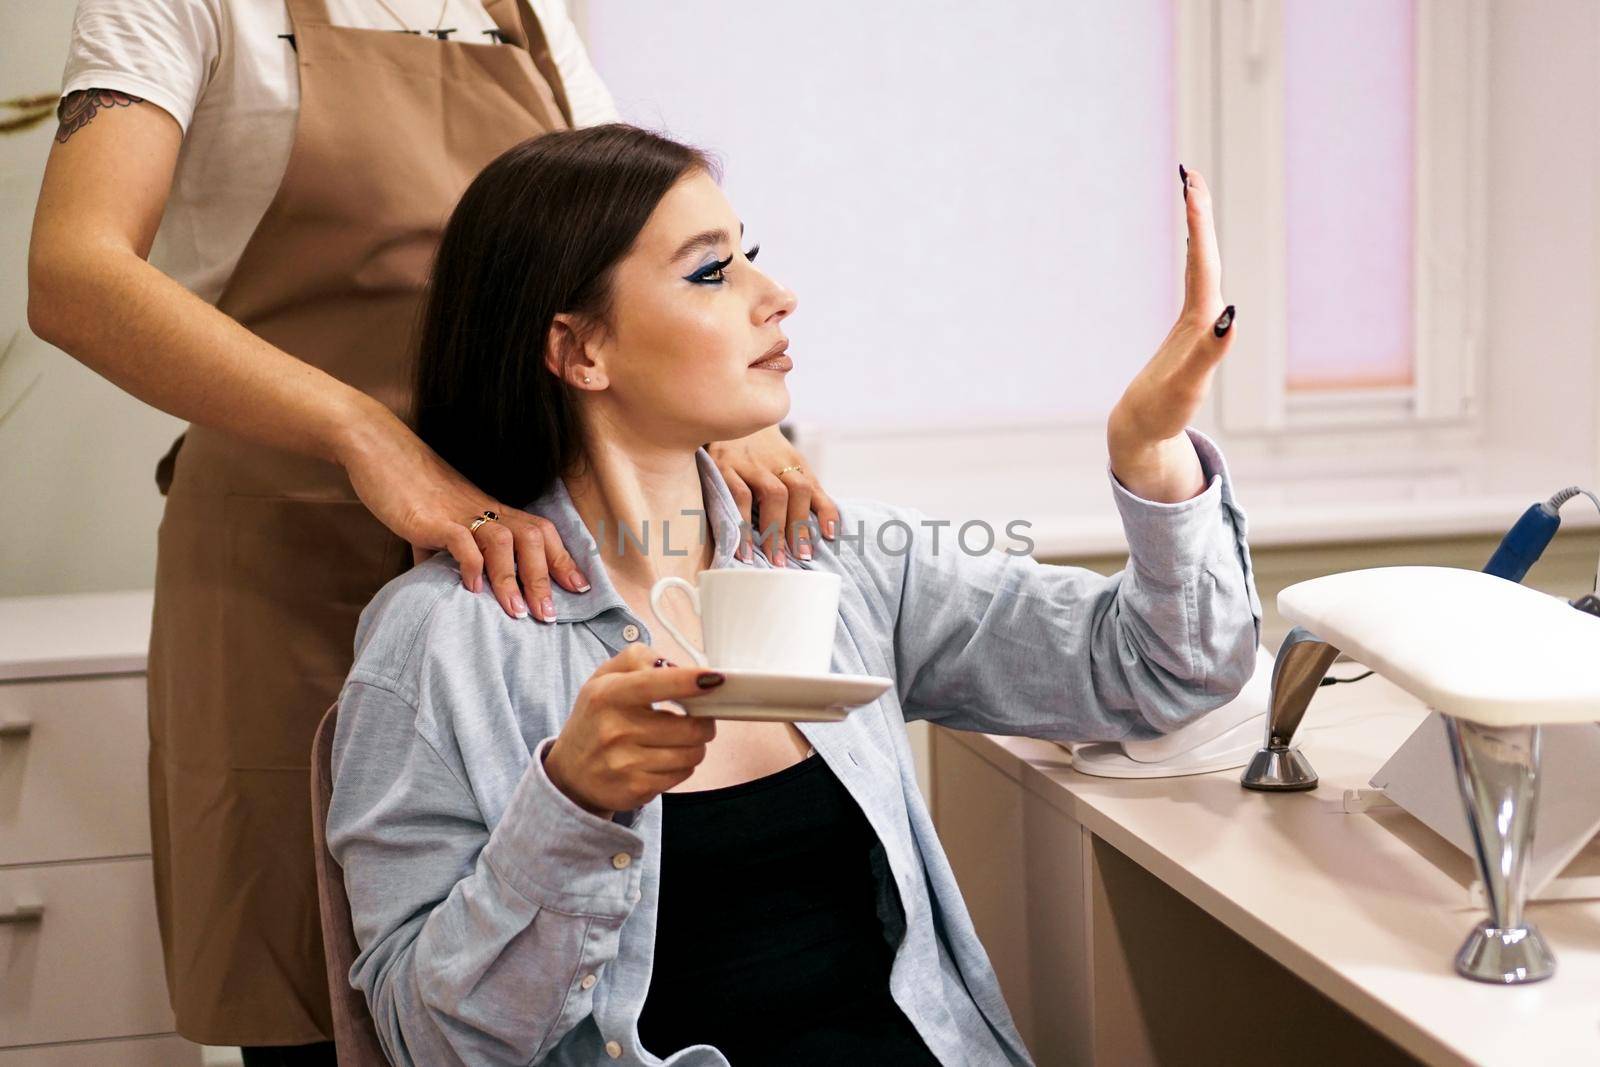 The girl looks at her manicure during the massage in beauty salon. She drinks coffee